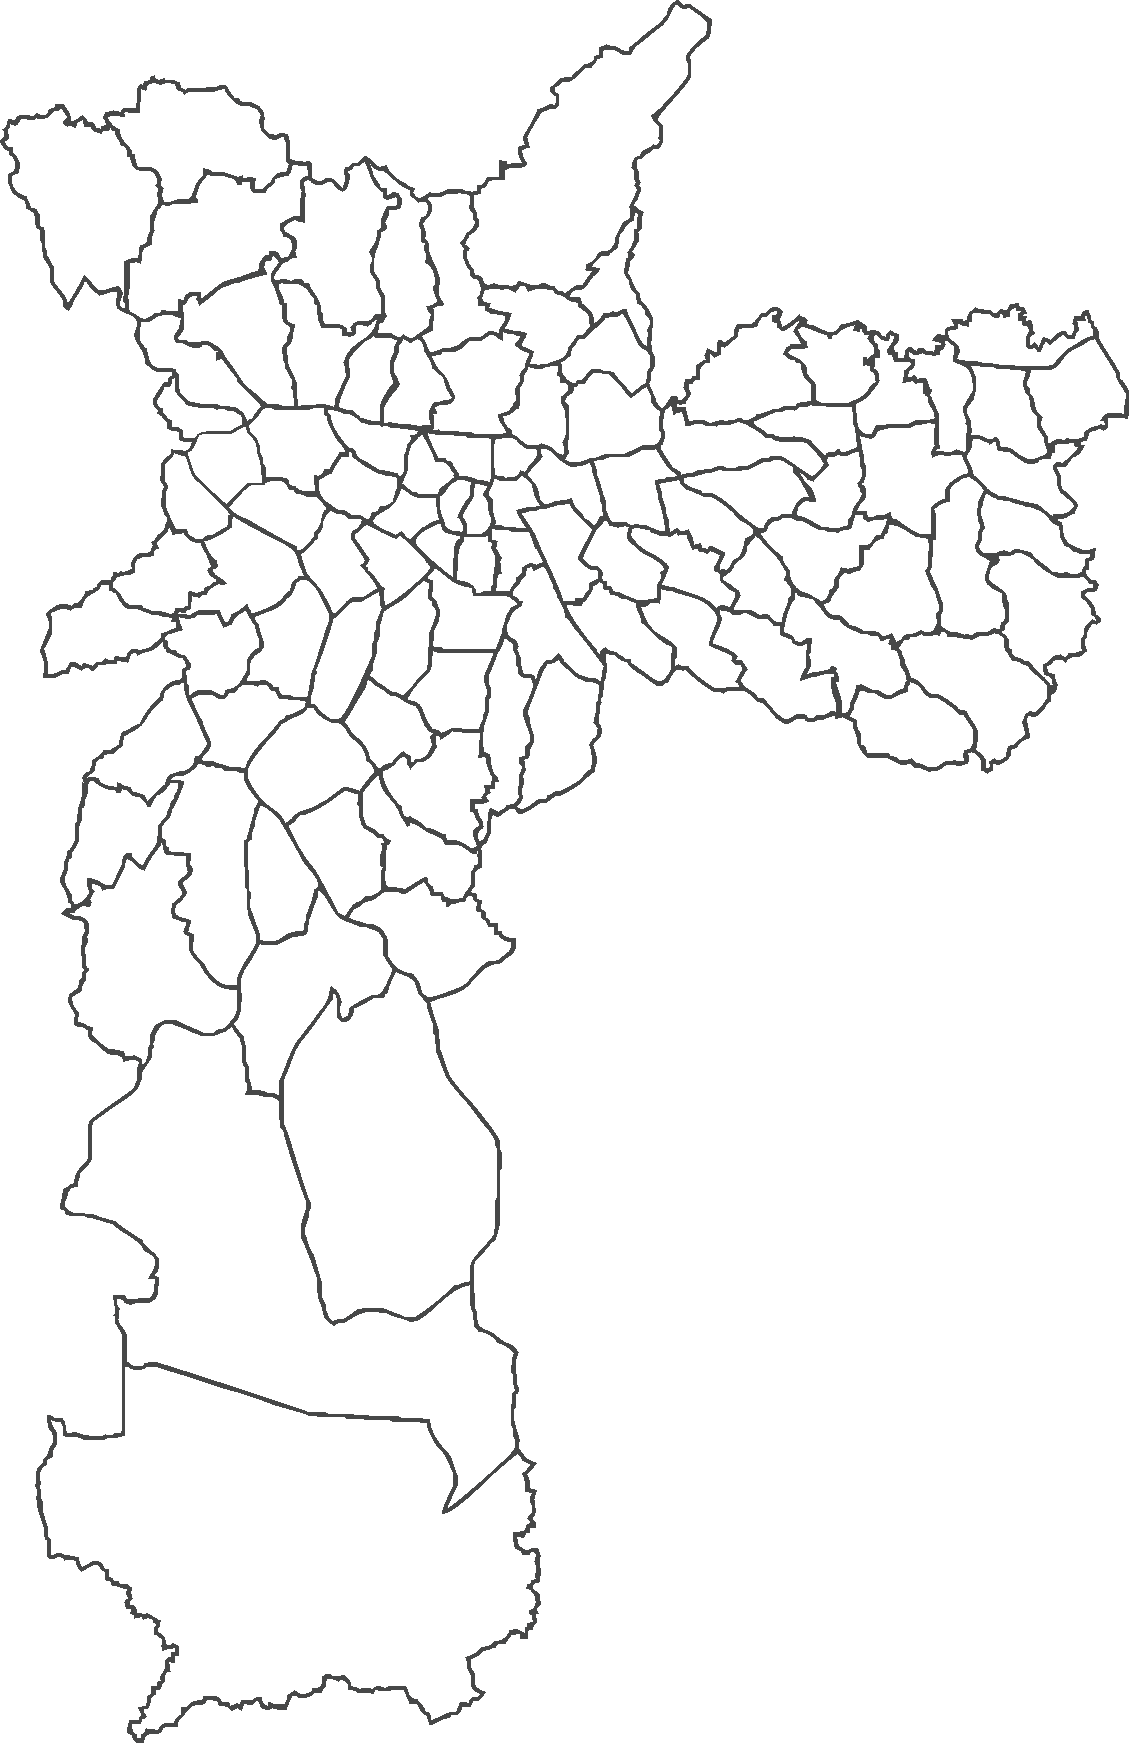 File:São Paulo districts.png - Wikipedia